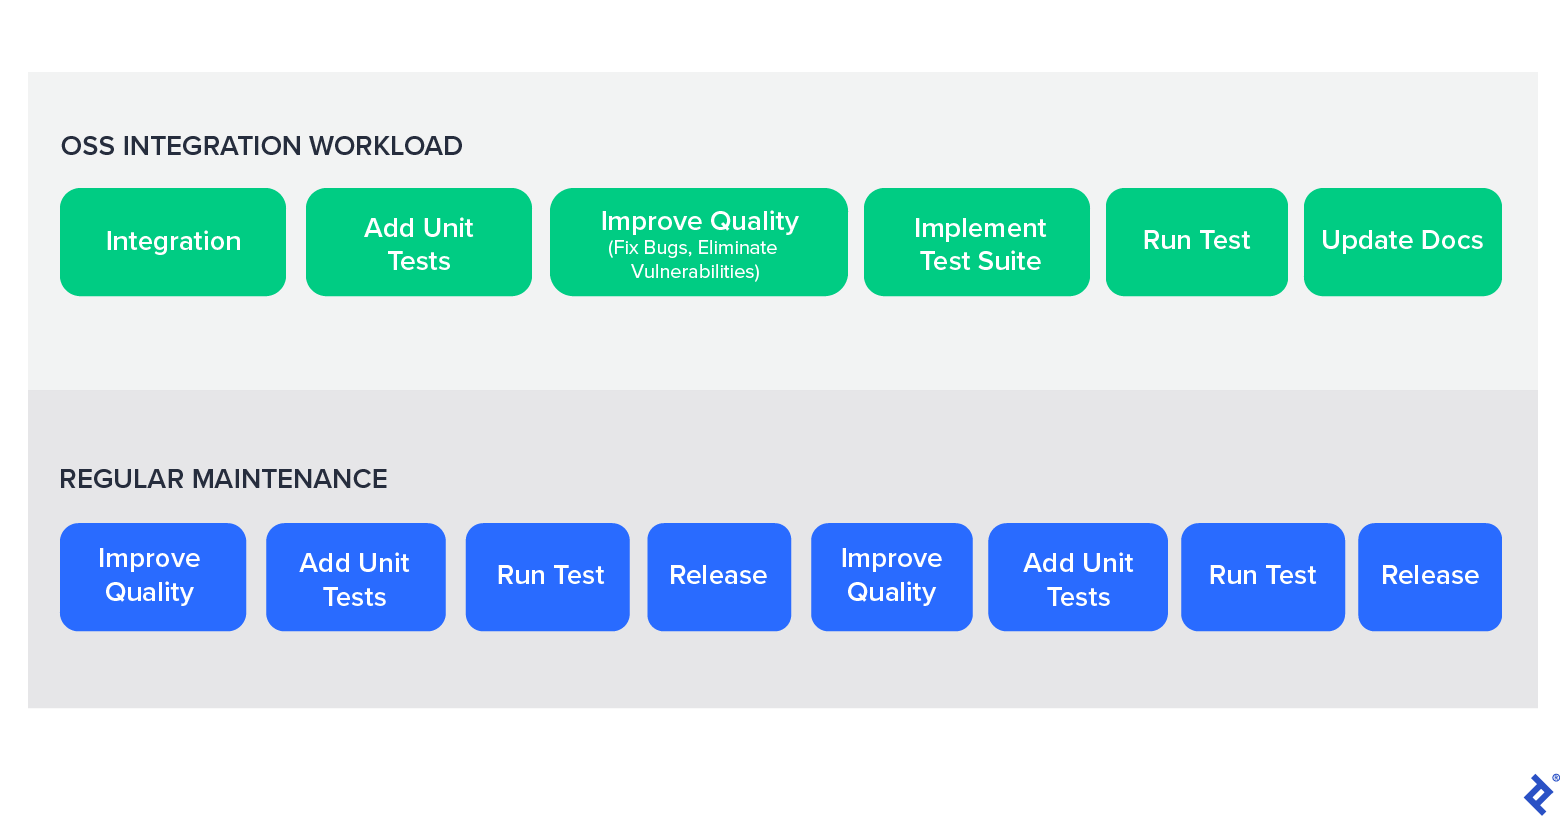 A row listing the stages of an OSS integration workload followed by a row listing the stages of regular maintenance.